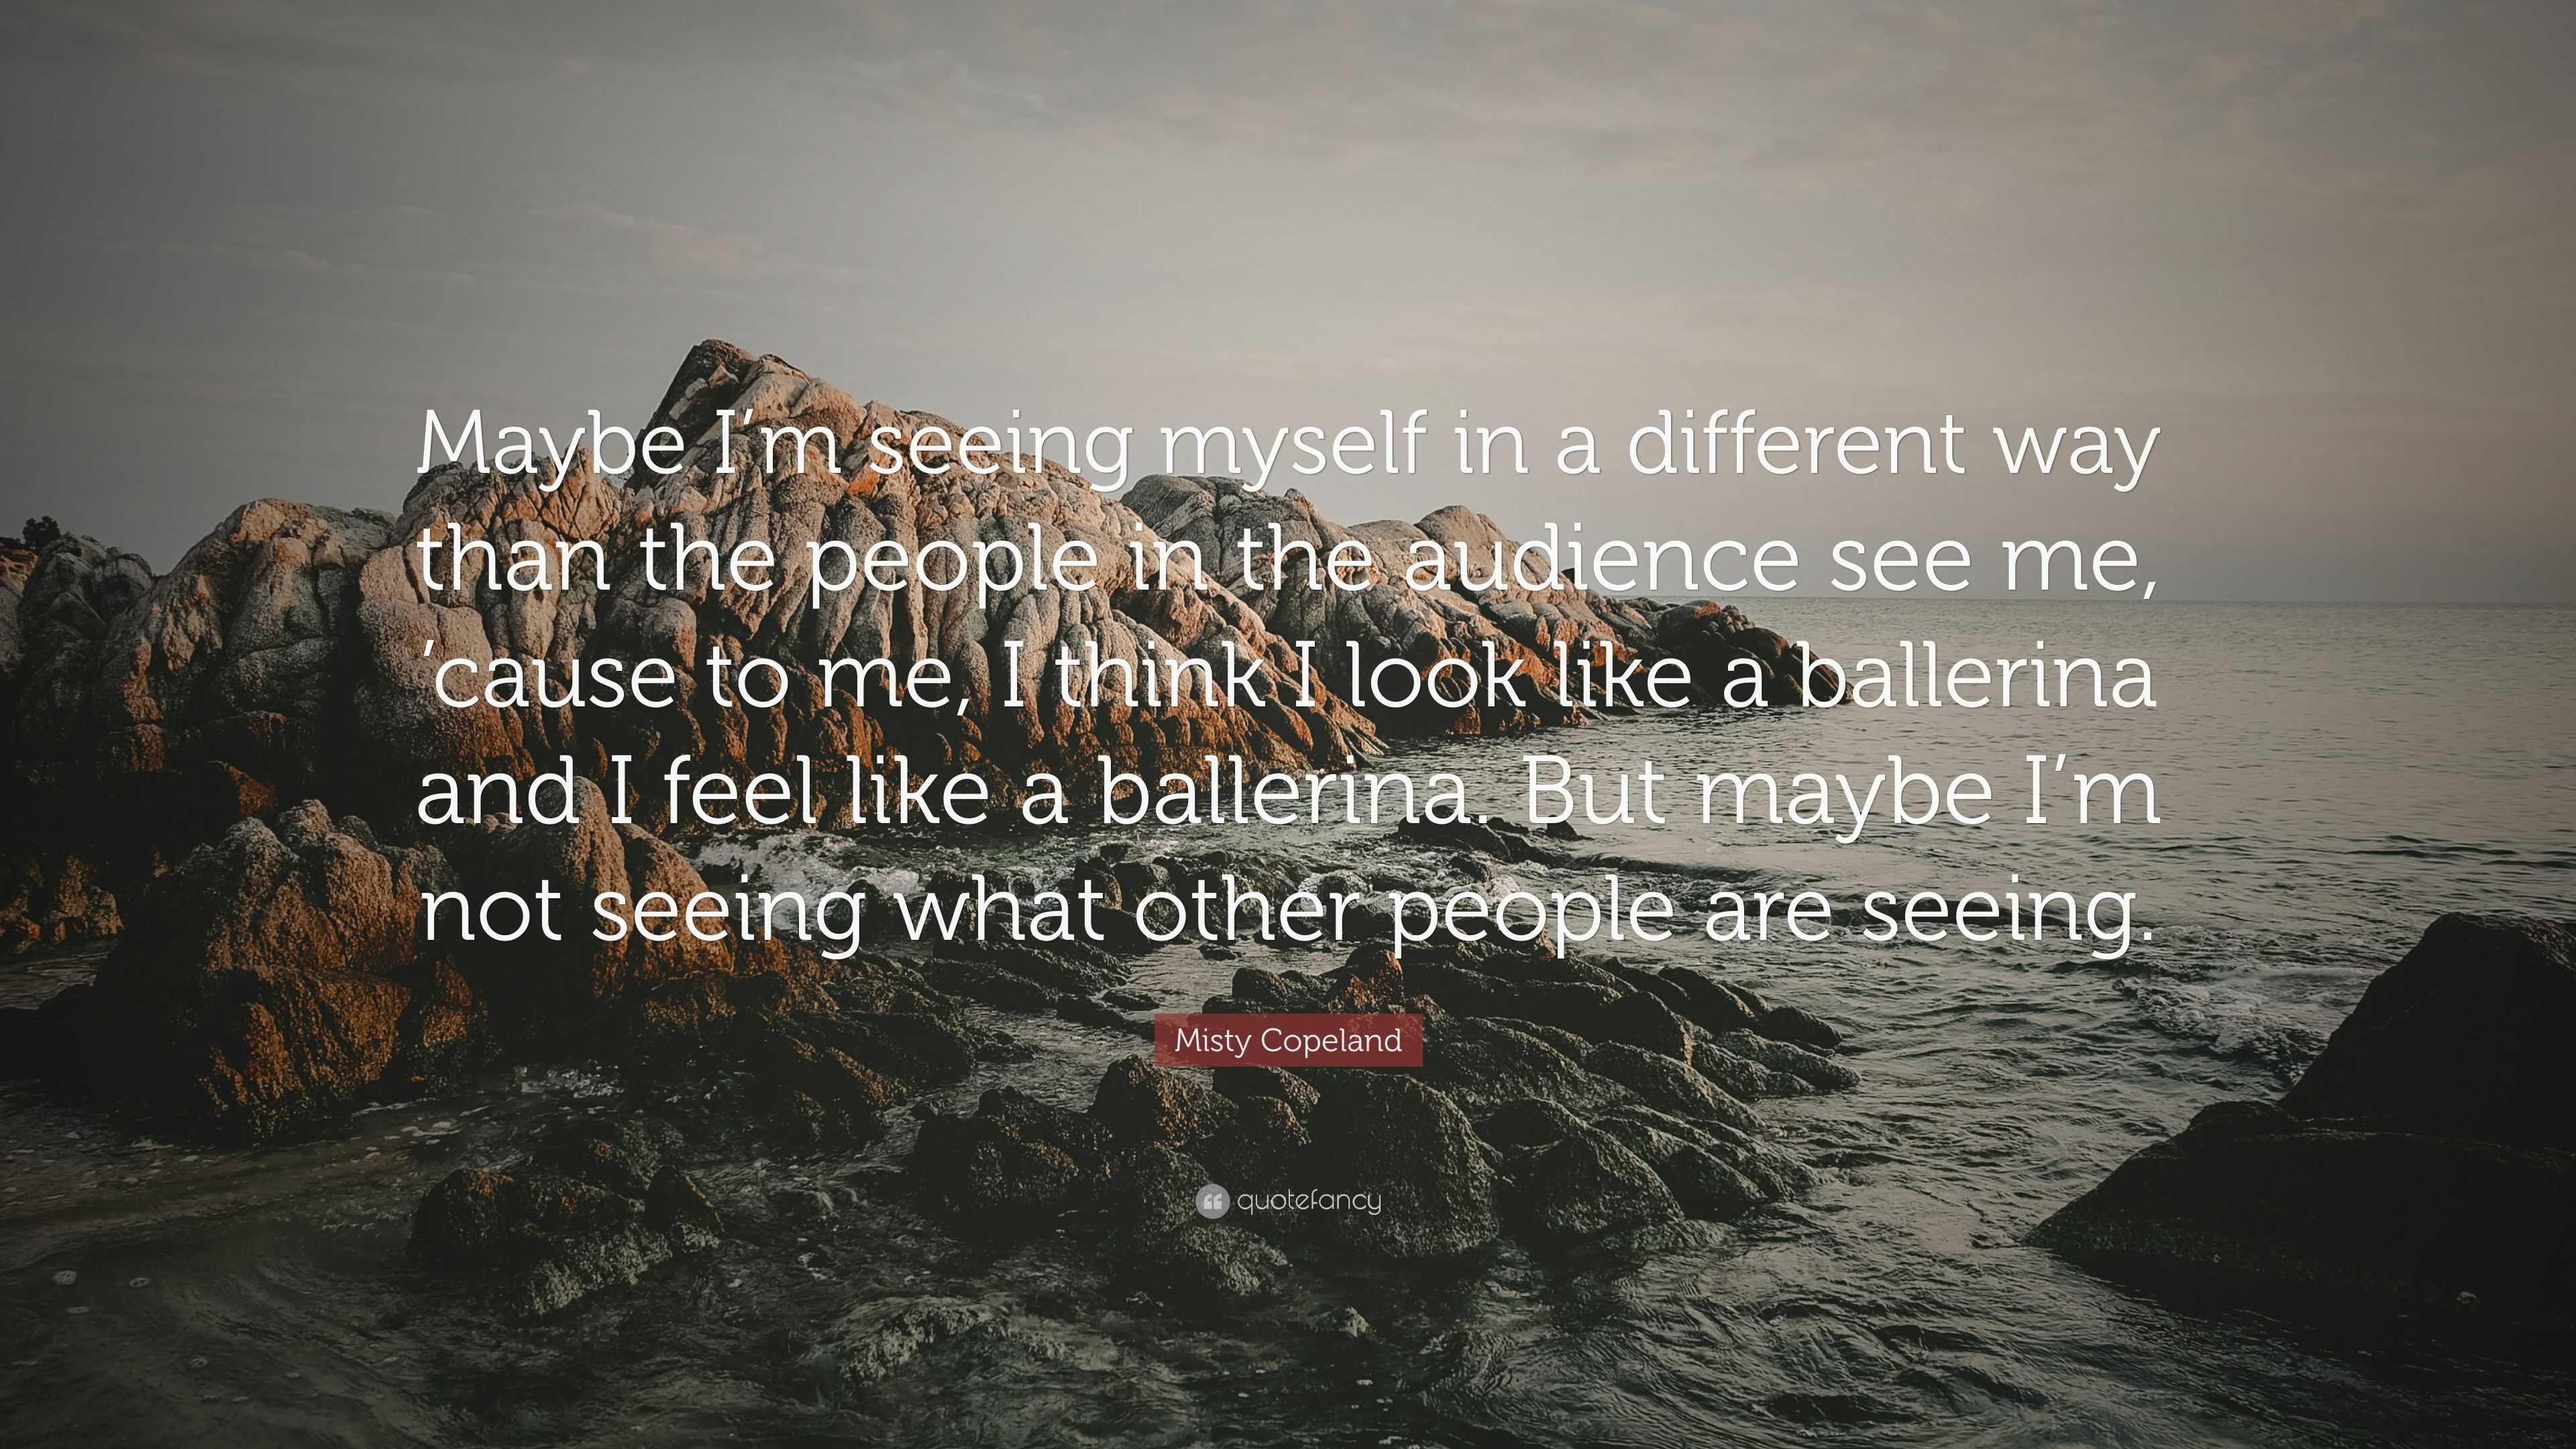 Misty Copeland Quote: “Maybe I’m seeing myself in a different way than ...